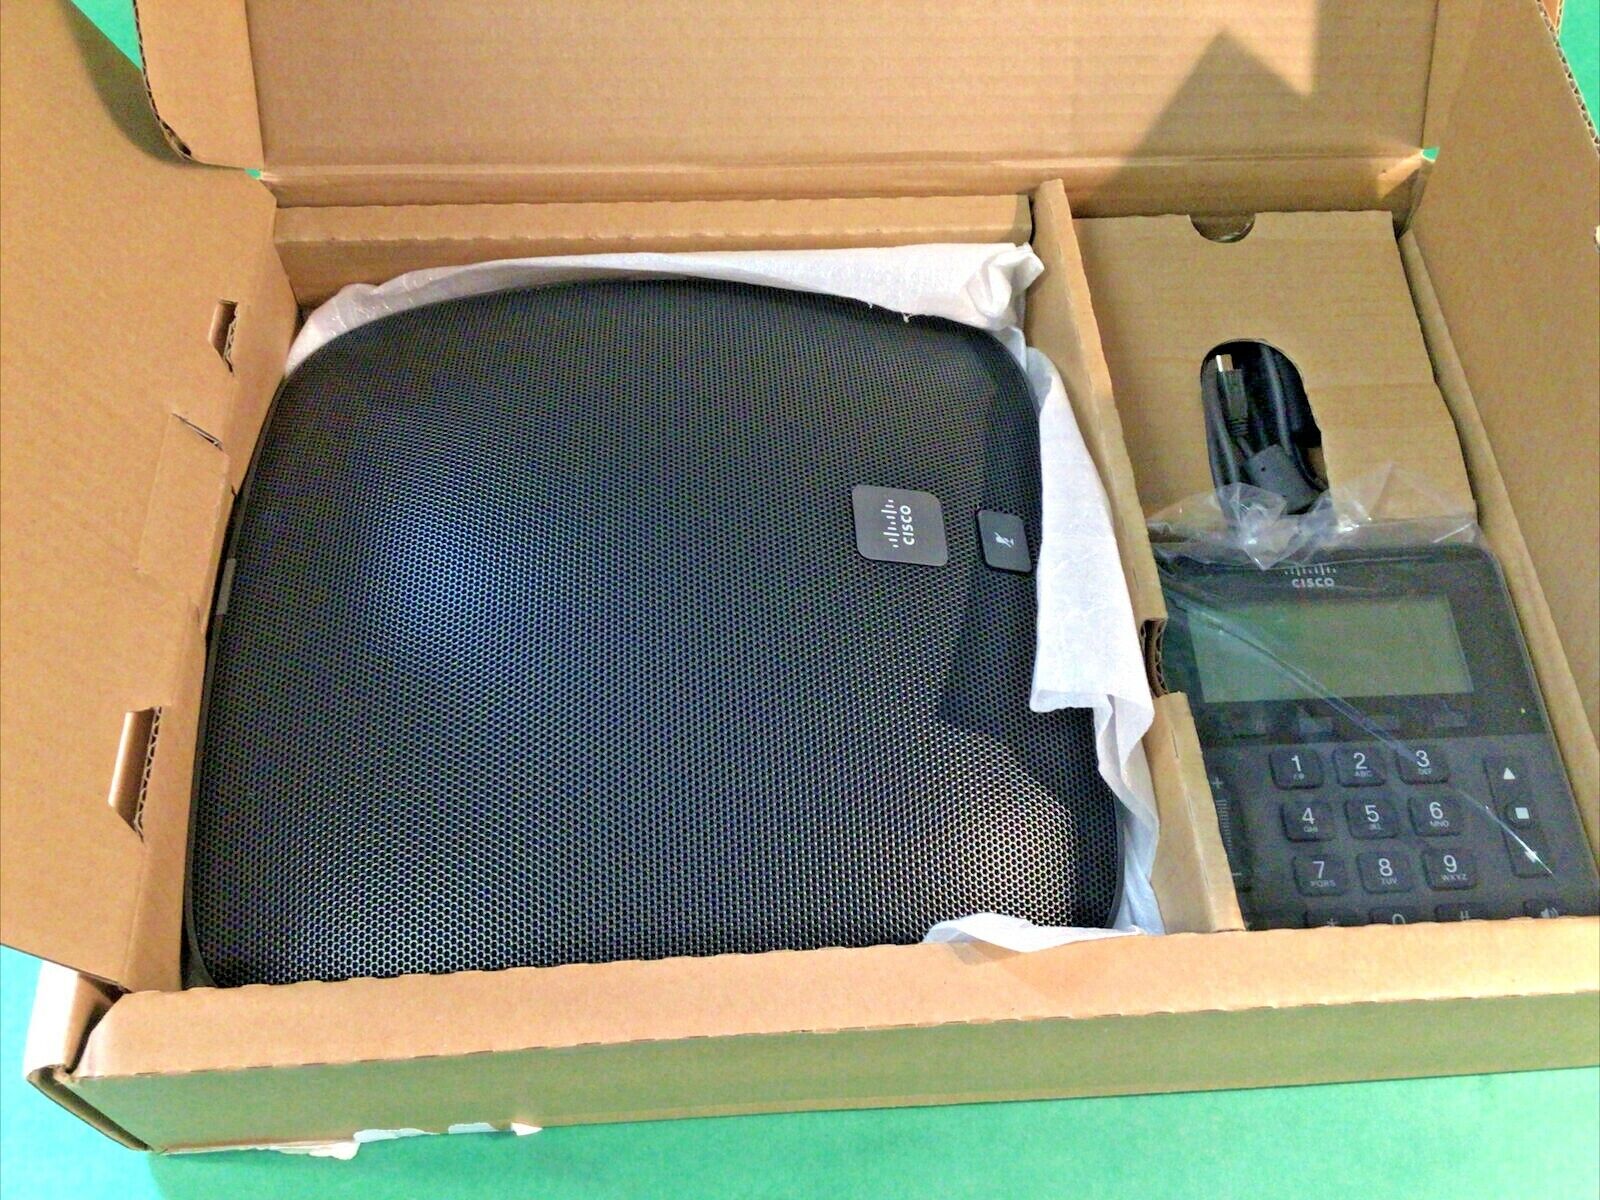 Cisco CP-8831-K9 IP Conference Phone Base and Controller